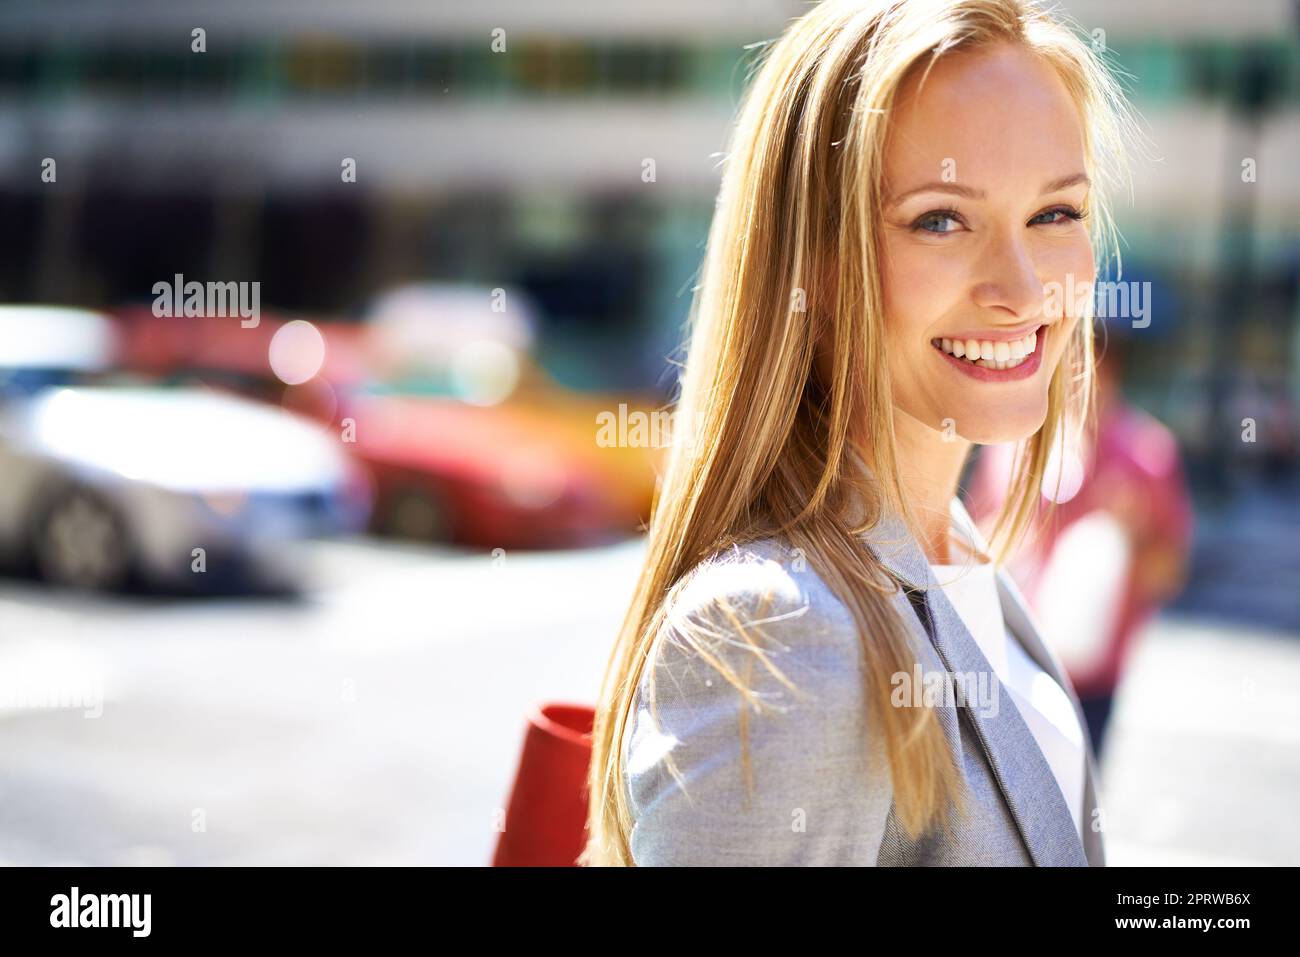 City smiles. A portrait of a beautiful young woman in the city. Stock Photo